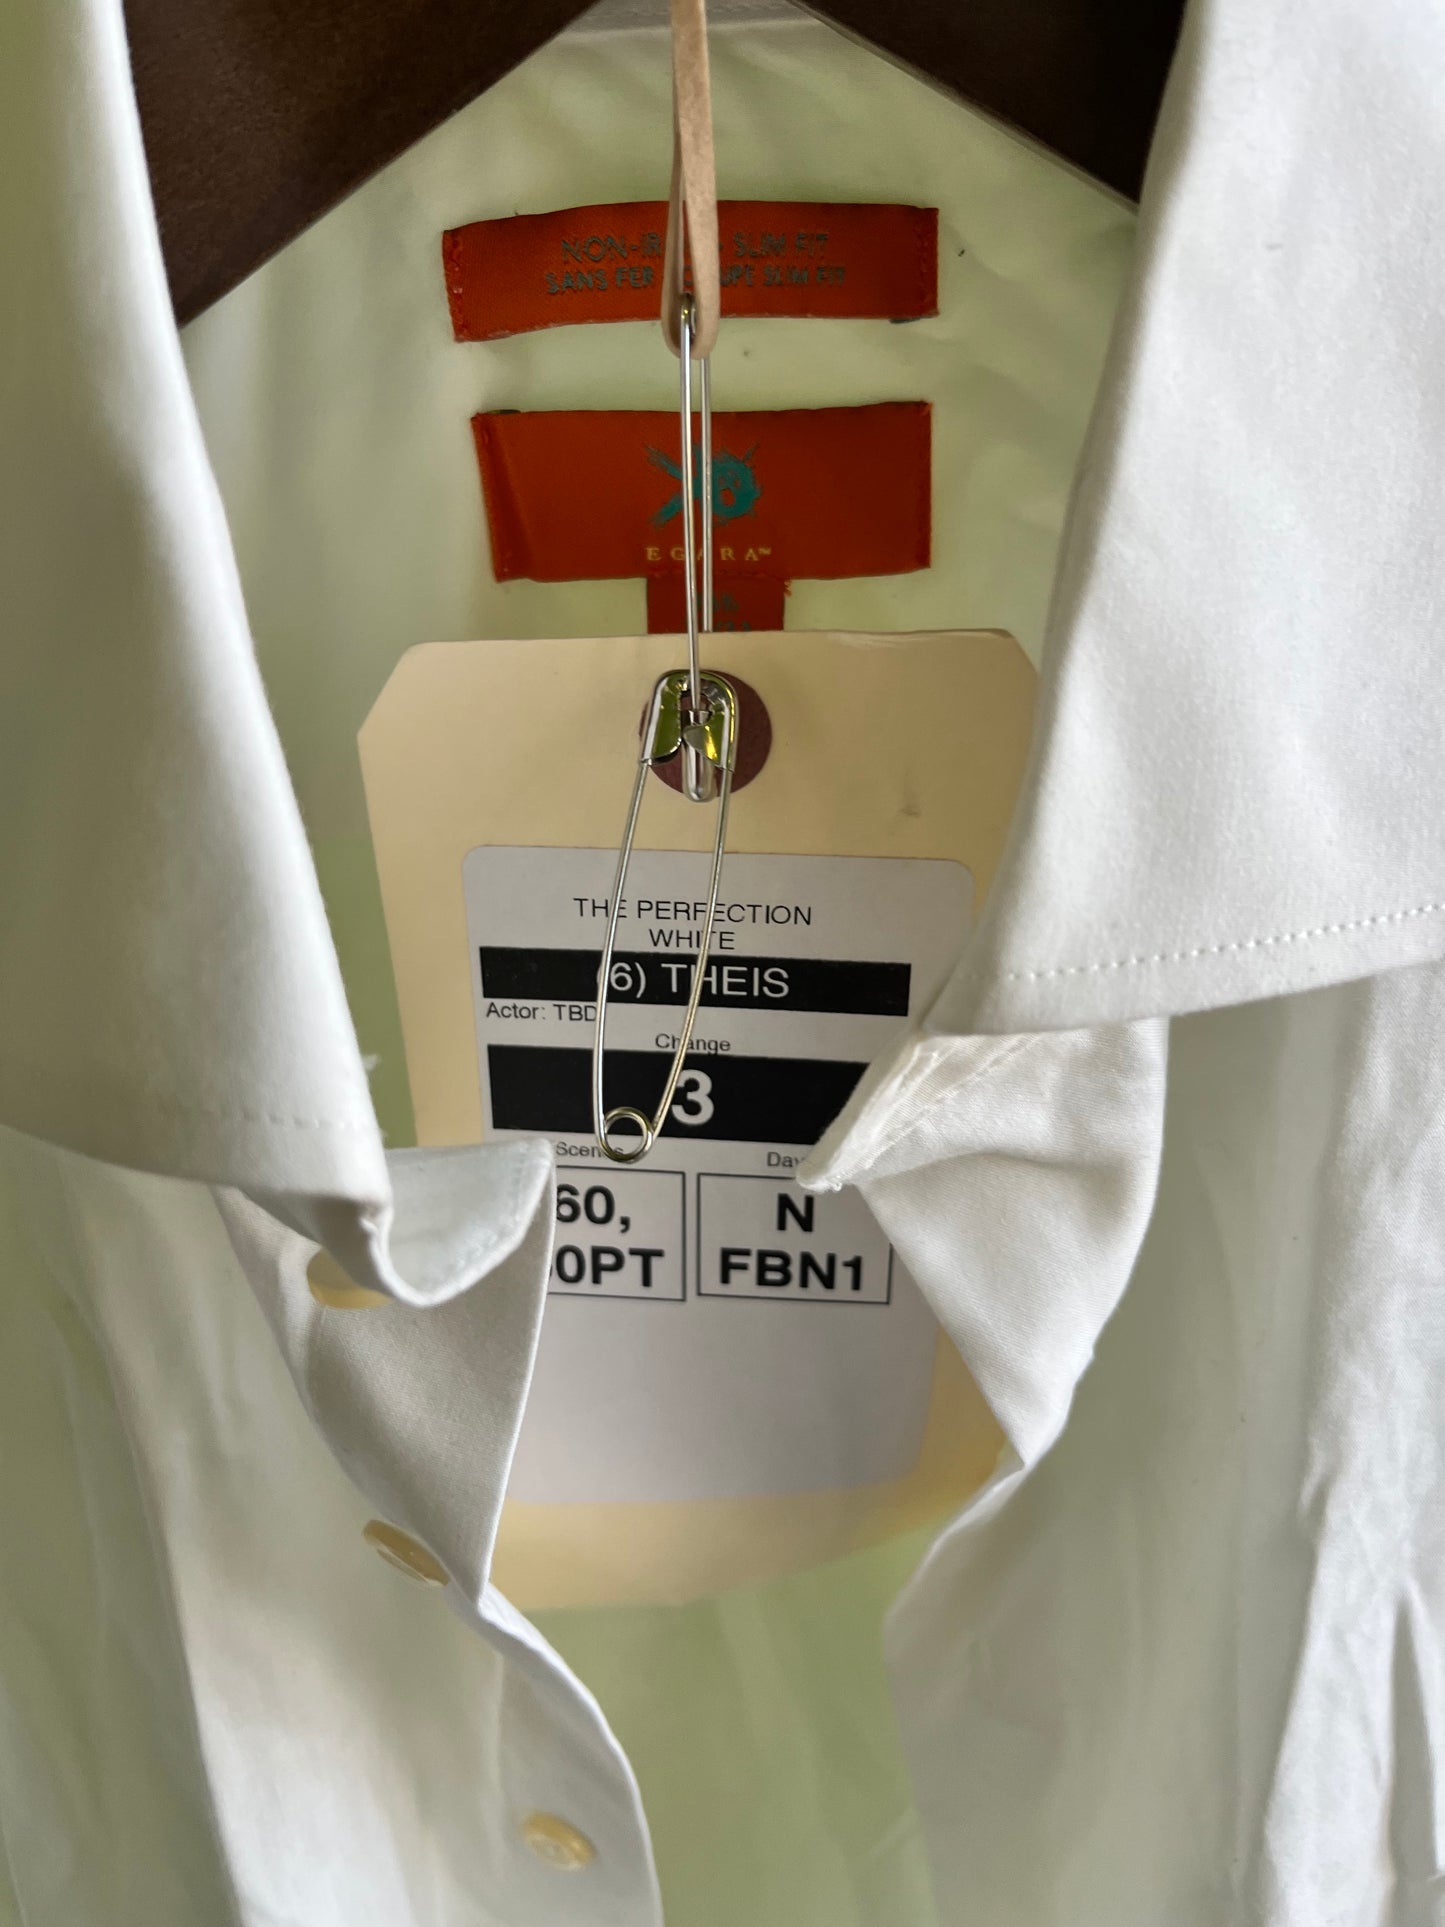 THE PERFECTION: Thesis White Shirt and Show Tag